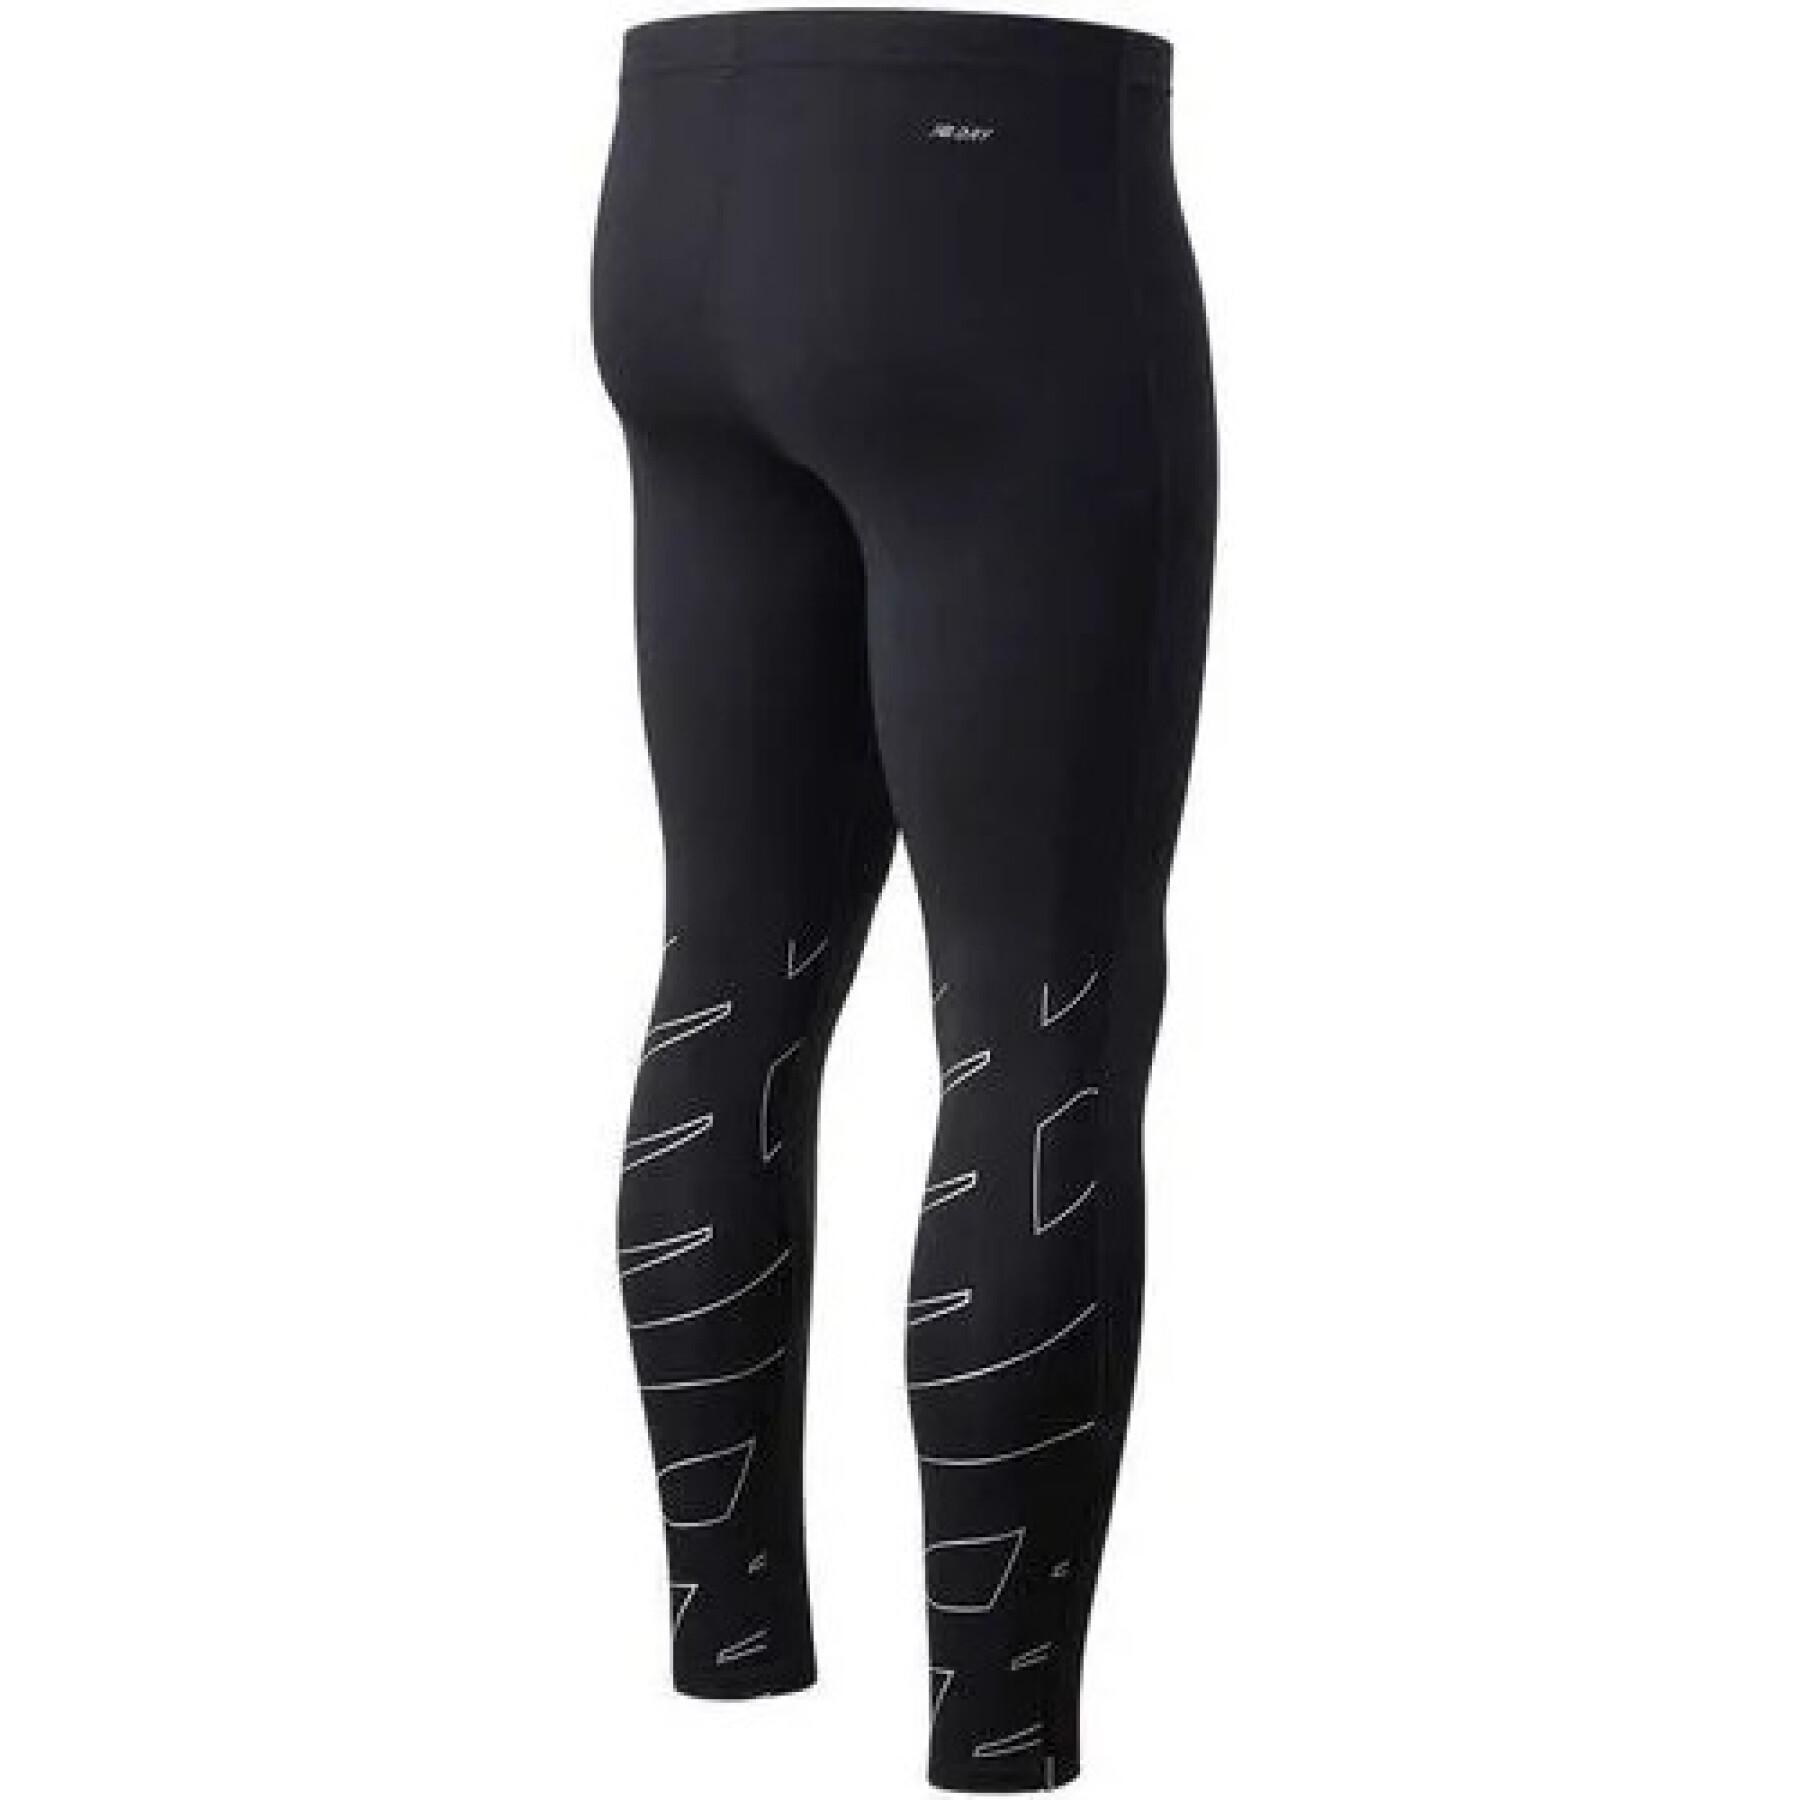 Tights New Balance printed accelerate